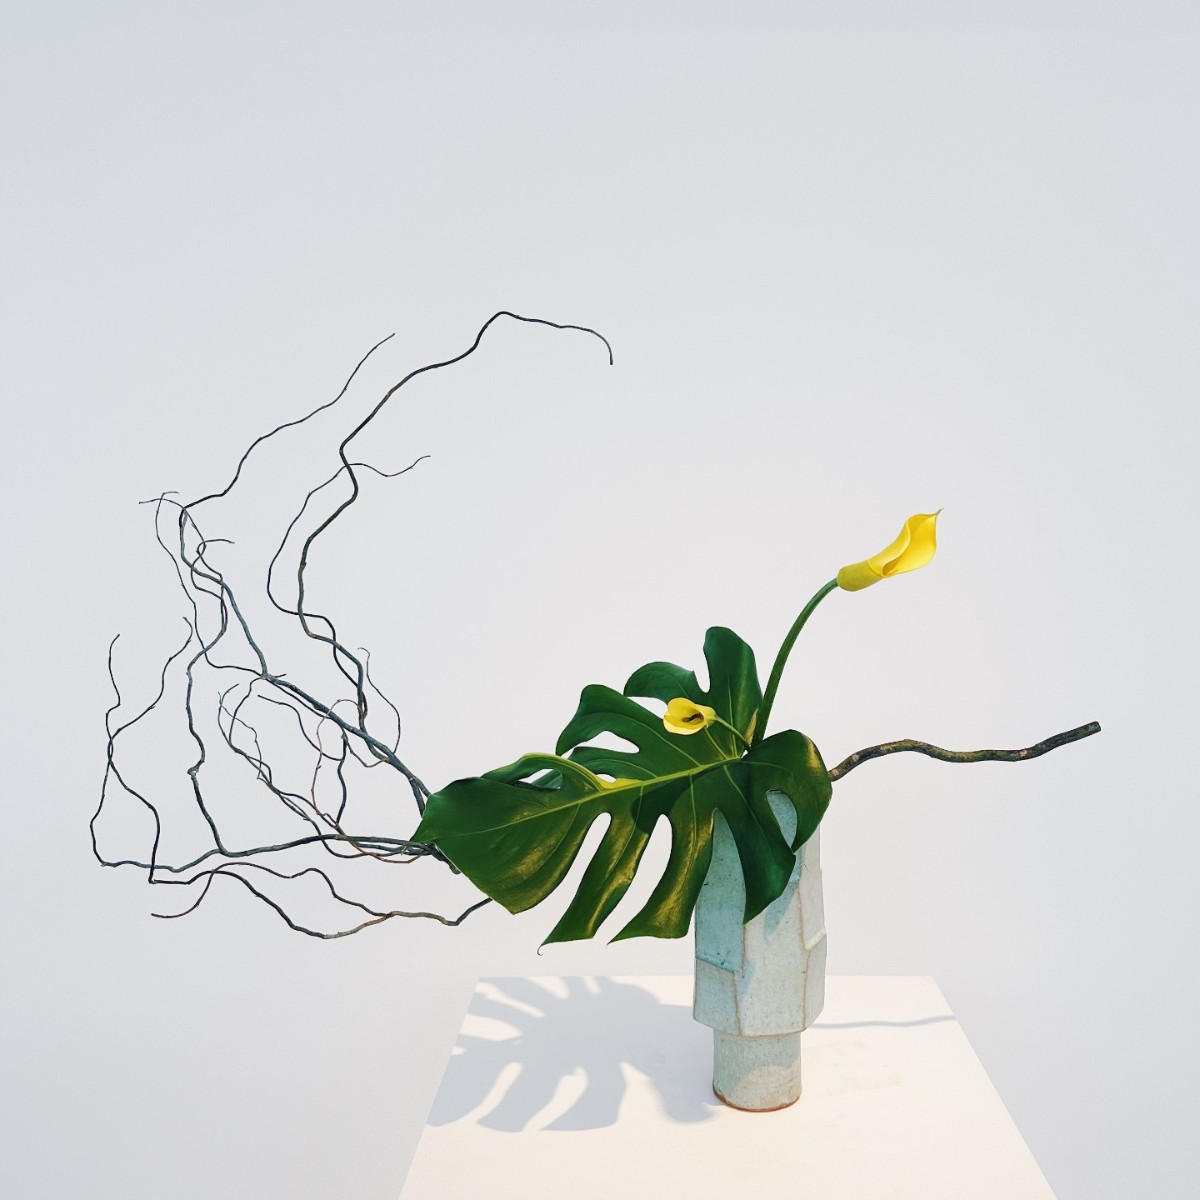 Ikebana artist Tomomi Tanowaki has used dried willows, yellow calla lilies and a freshly cut monstera leaf to complete this week's harmonious arrangement. 🌼 〰️🍃 

On display now at QAG, open daily 10.00am – 5.00pm, free.

#IkebanaQAG #MuseumBouquet #QAGOMA #IkebanaBrisbane